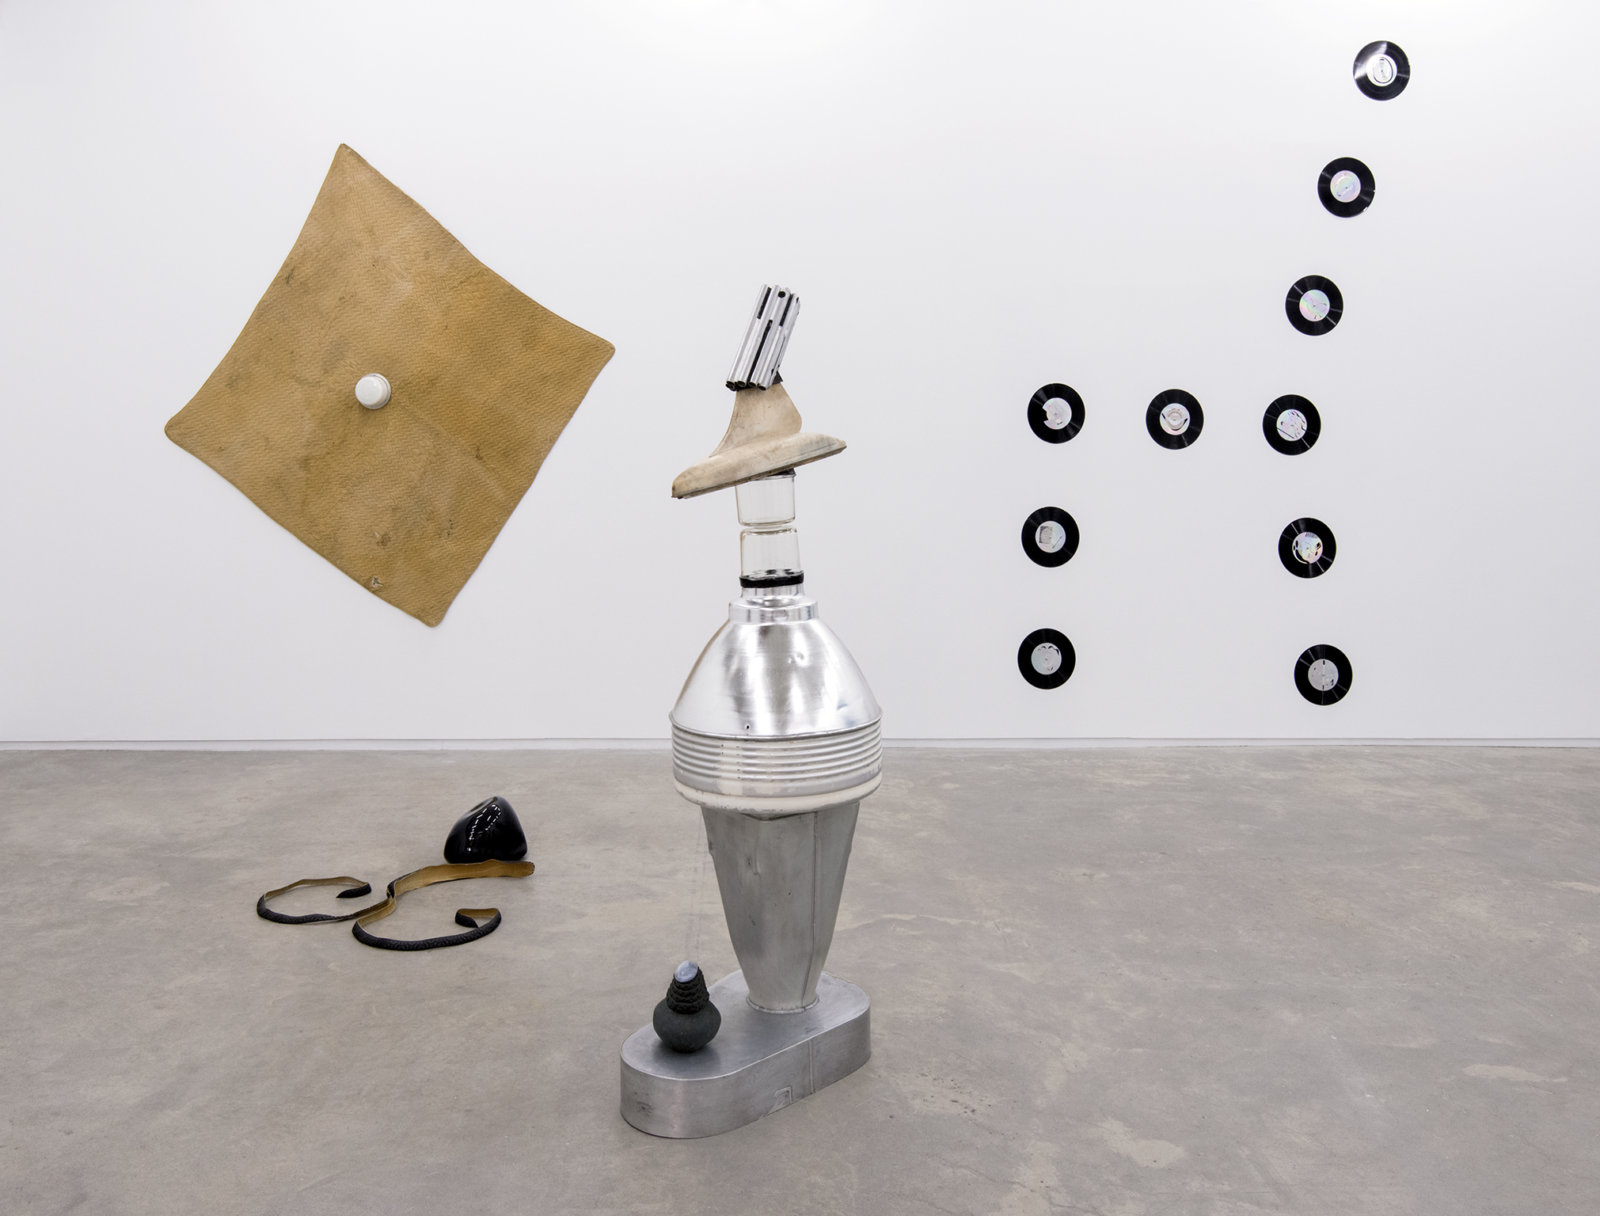 Jerry Pethick, Kolossus of Kindergarden, 1987–1989, spectra-foil on records, aluminium, blown glass, wood, rock, tires, cargo blanket, dimensions variable